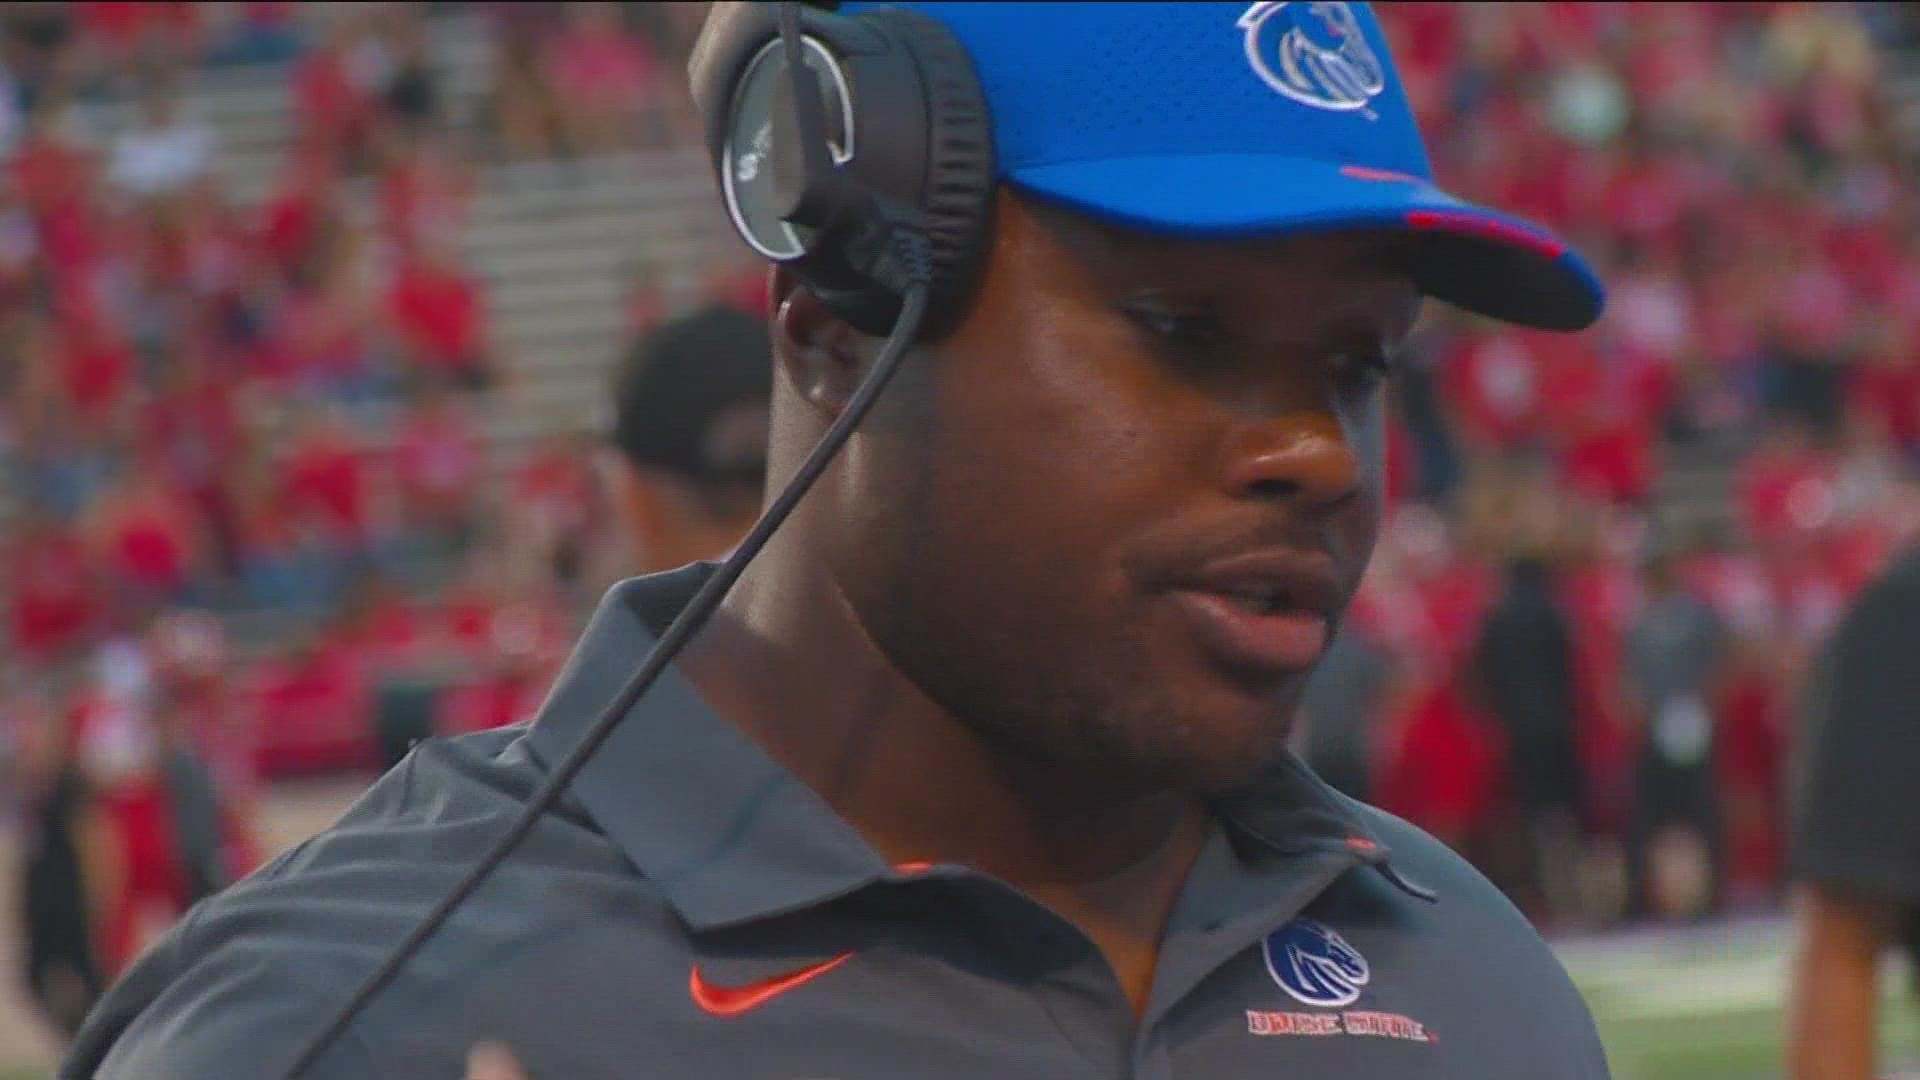 Boise State associate head coach, running backs coach and special teams coordinator, Keith Bhonapha, is joining the Oregon State coaching staff in Corvallis.